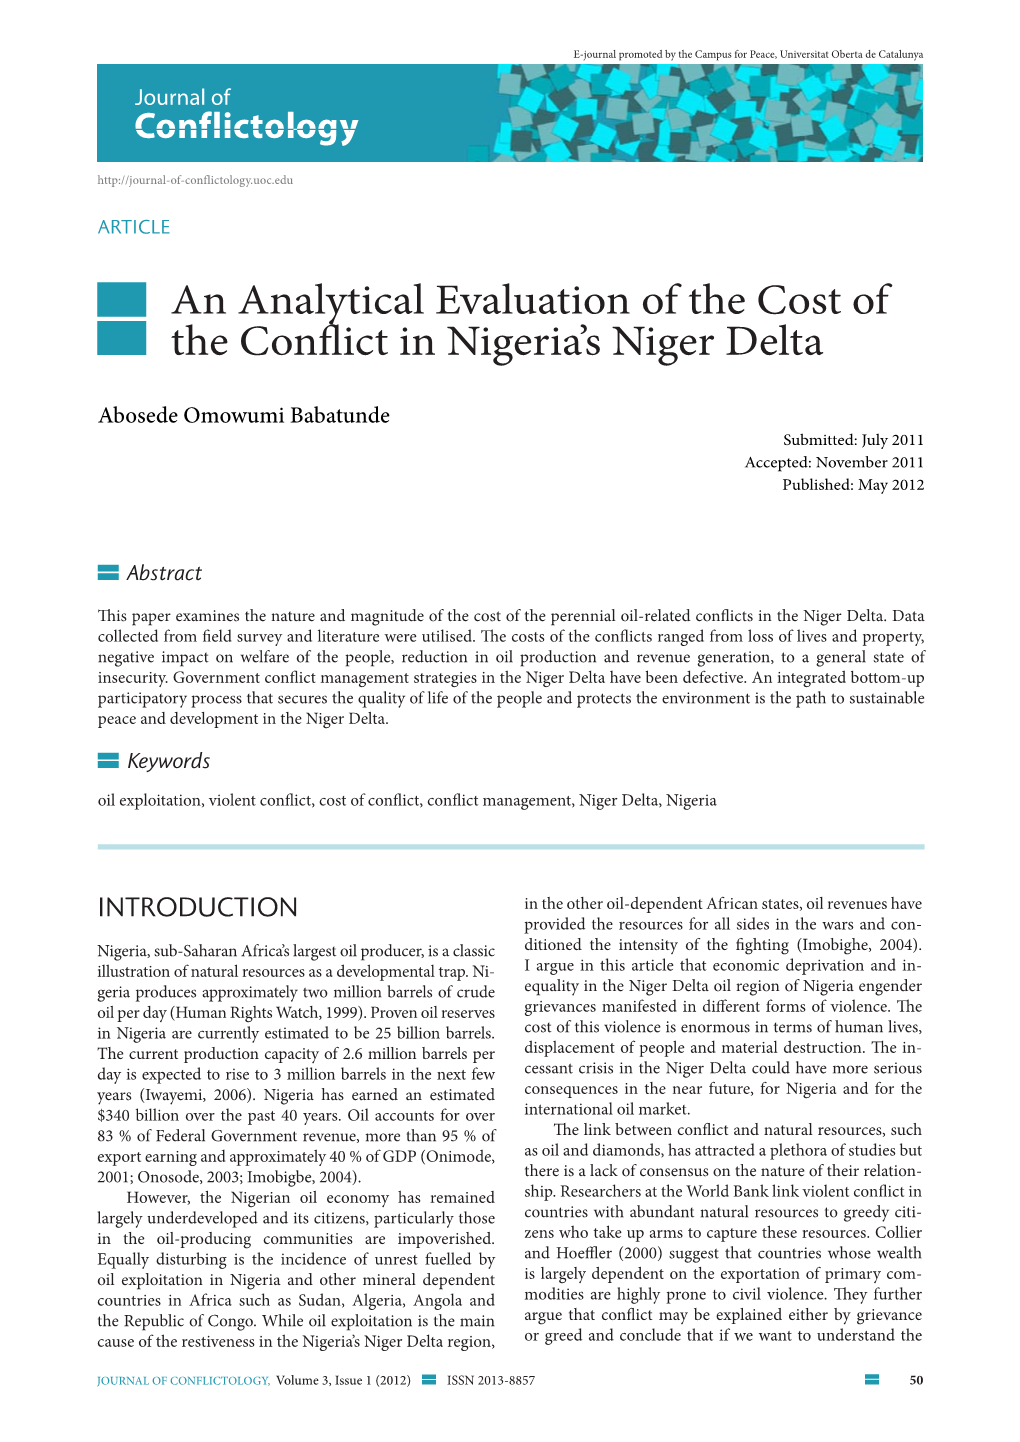 An Analytical Evaluation of the Cost of the Conflict in Nigeria's Niger Delta